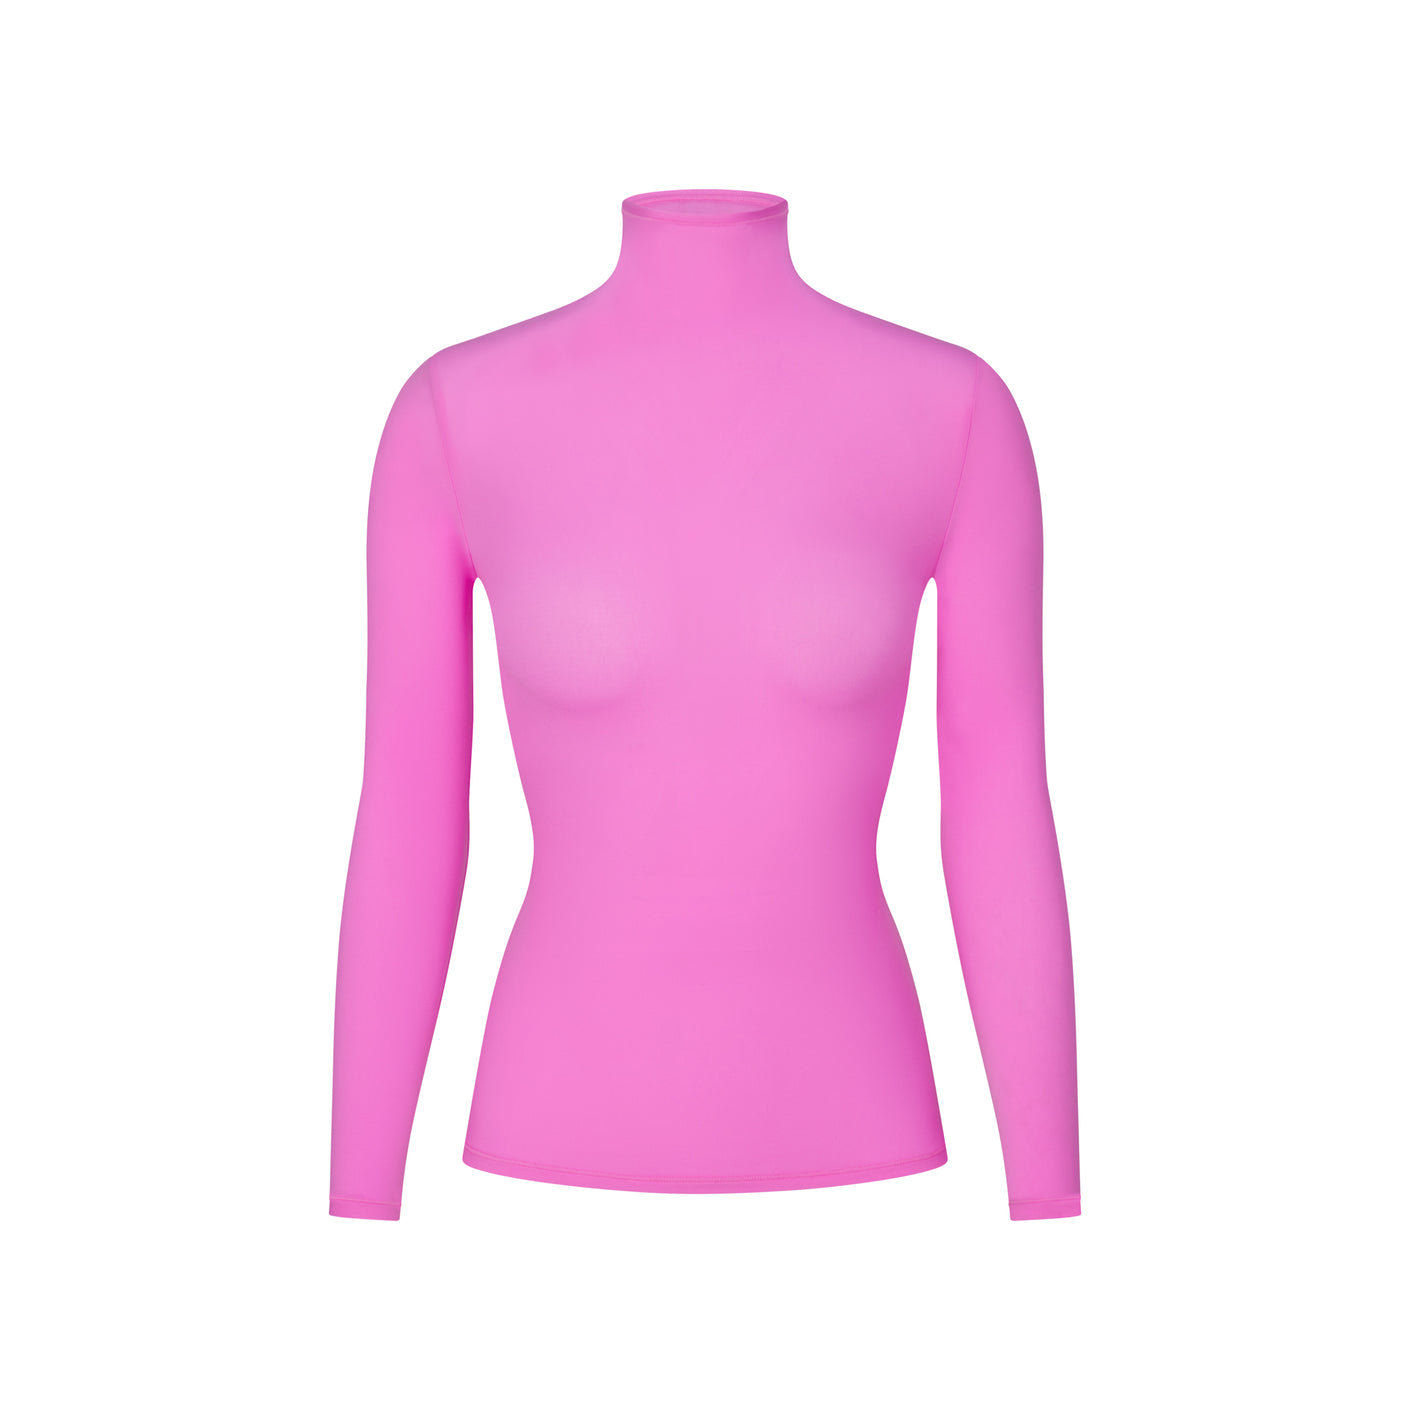 FITS EVERYBODY TURTLENECK TOP | NEON ORCHID